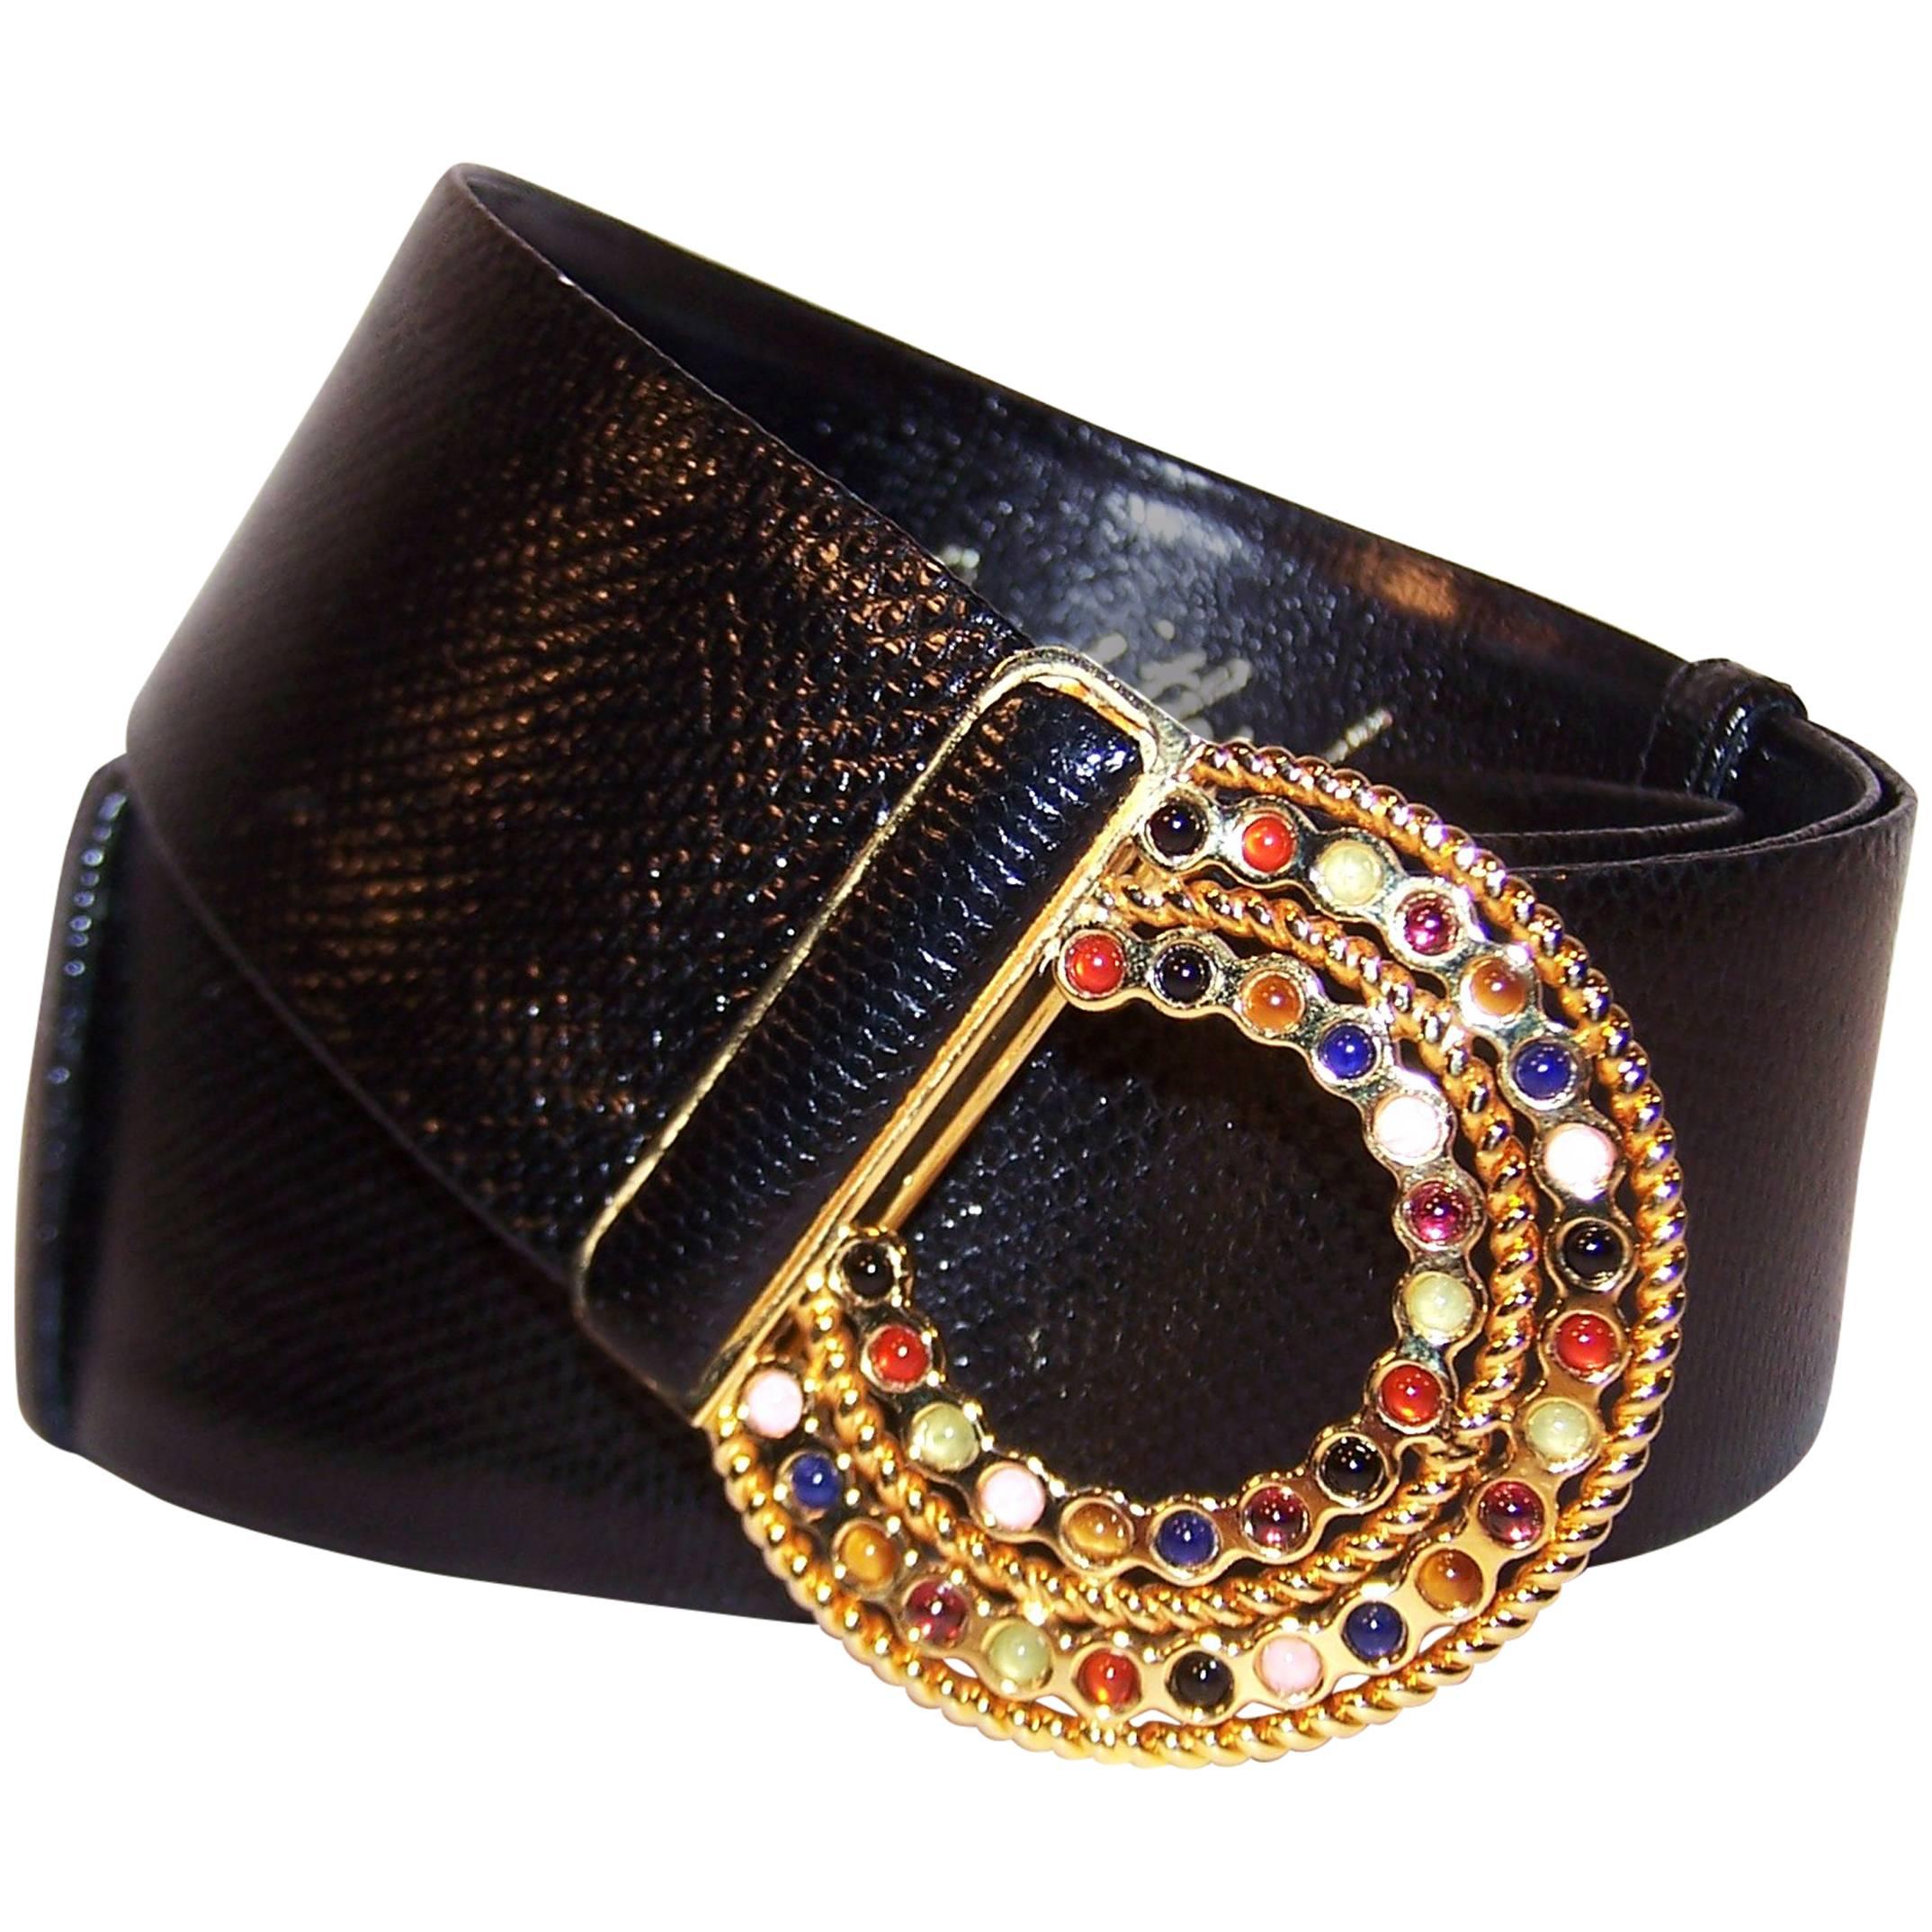 C.1990 Judith Leiber Black Lizard Belt With Cabochon Bejeweled Buckle